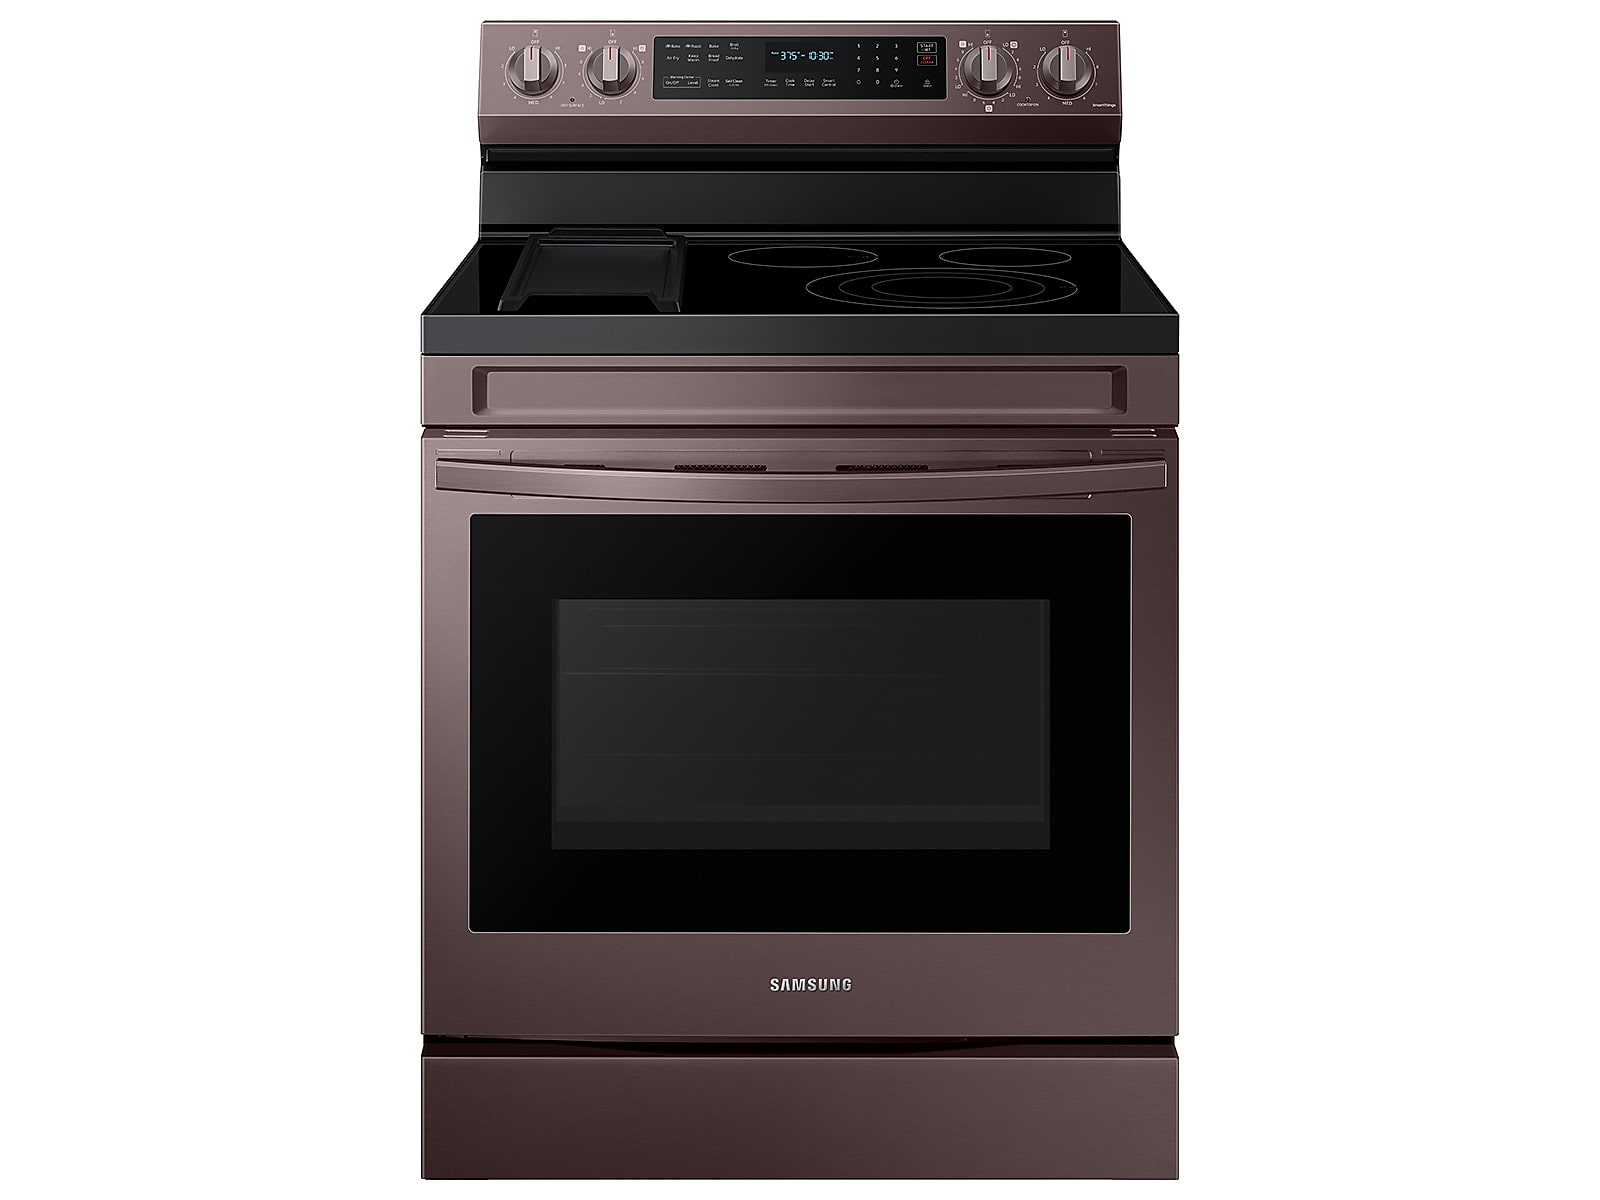 Samsung 6.3 cu. ft. Smart Freestanding Electric Range with No-Preheat Air Fry, Convection+ & Griddle in Tuscan Stainless Steel(NE63A6711ST/AA) photo